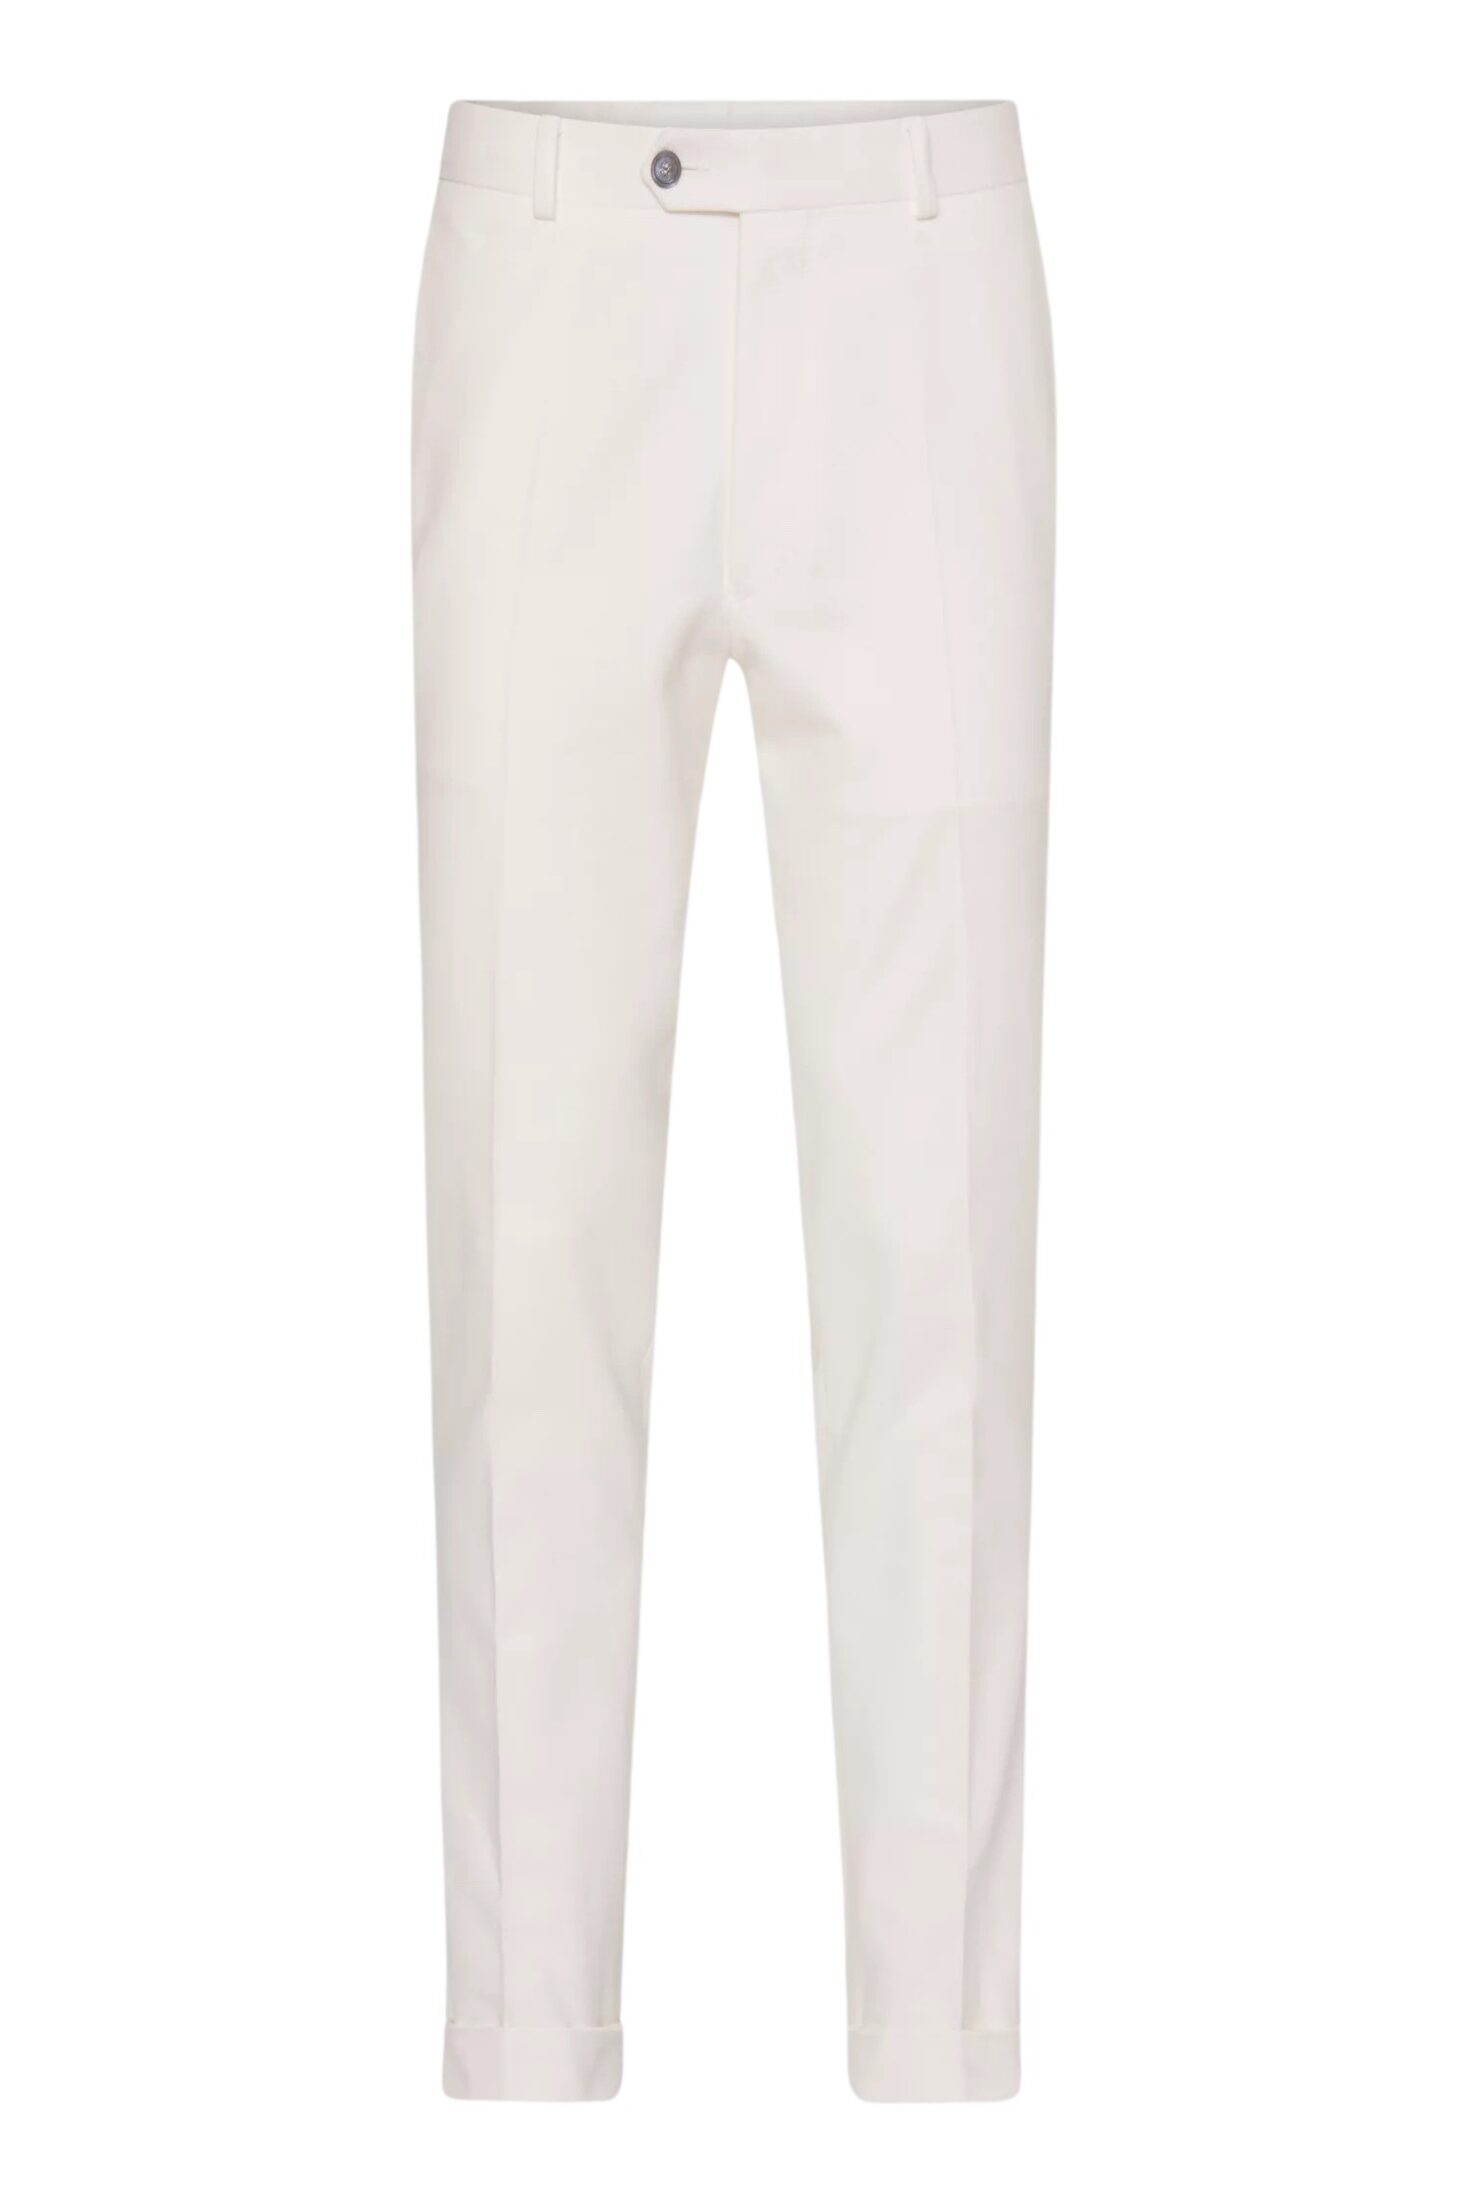 oscar-jacobson_denz-turn-up-trousers_snow-white_53905771_904_front